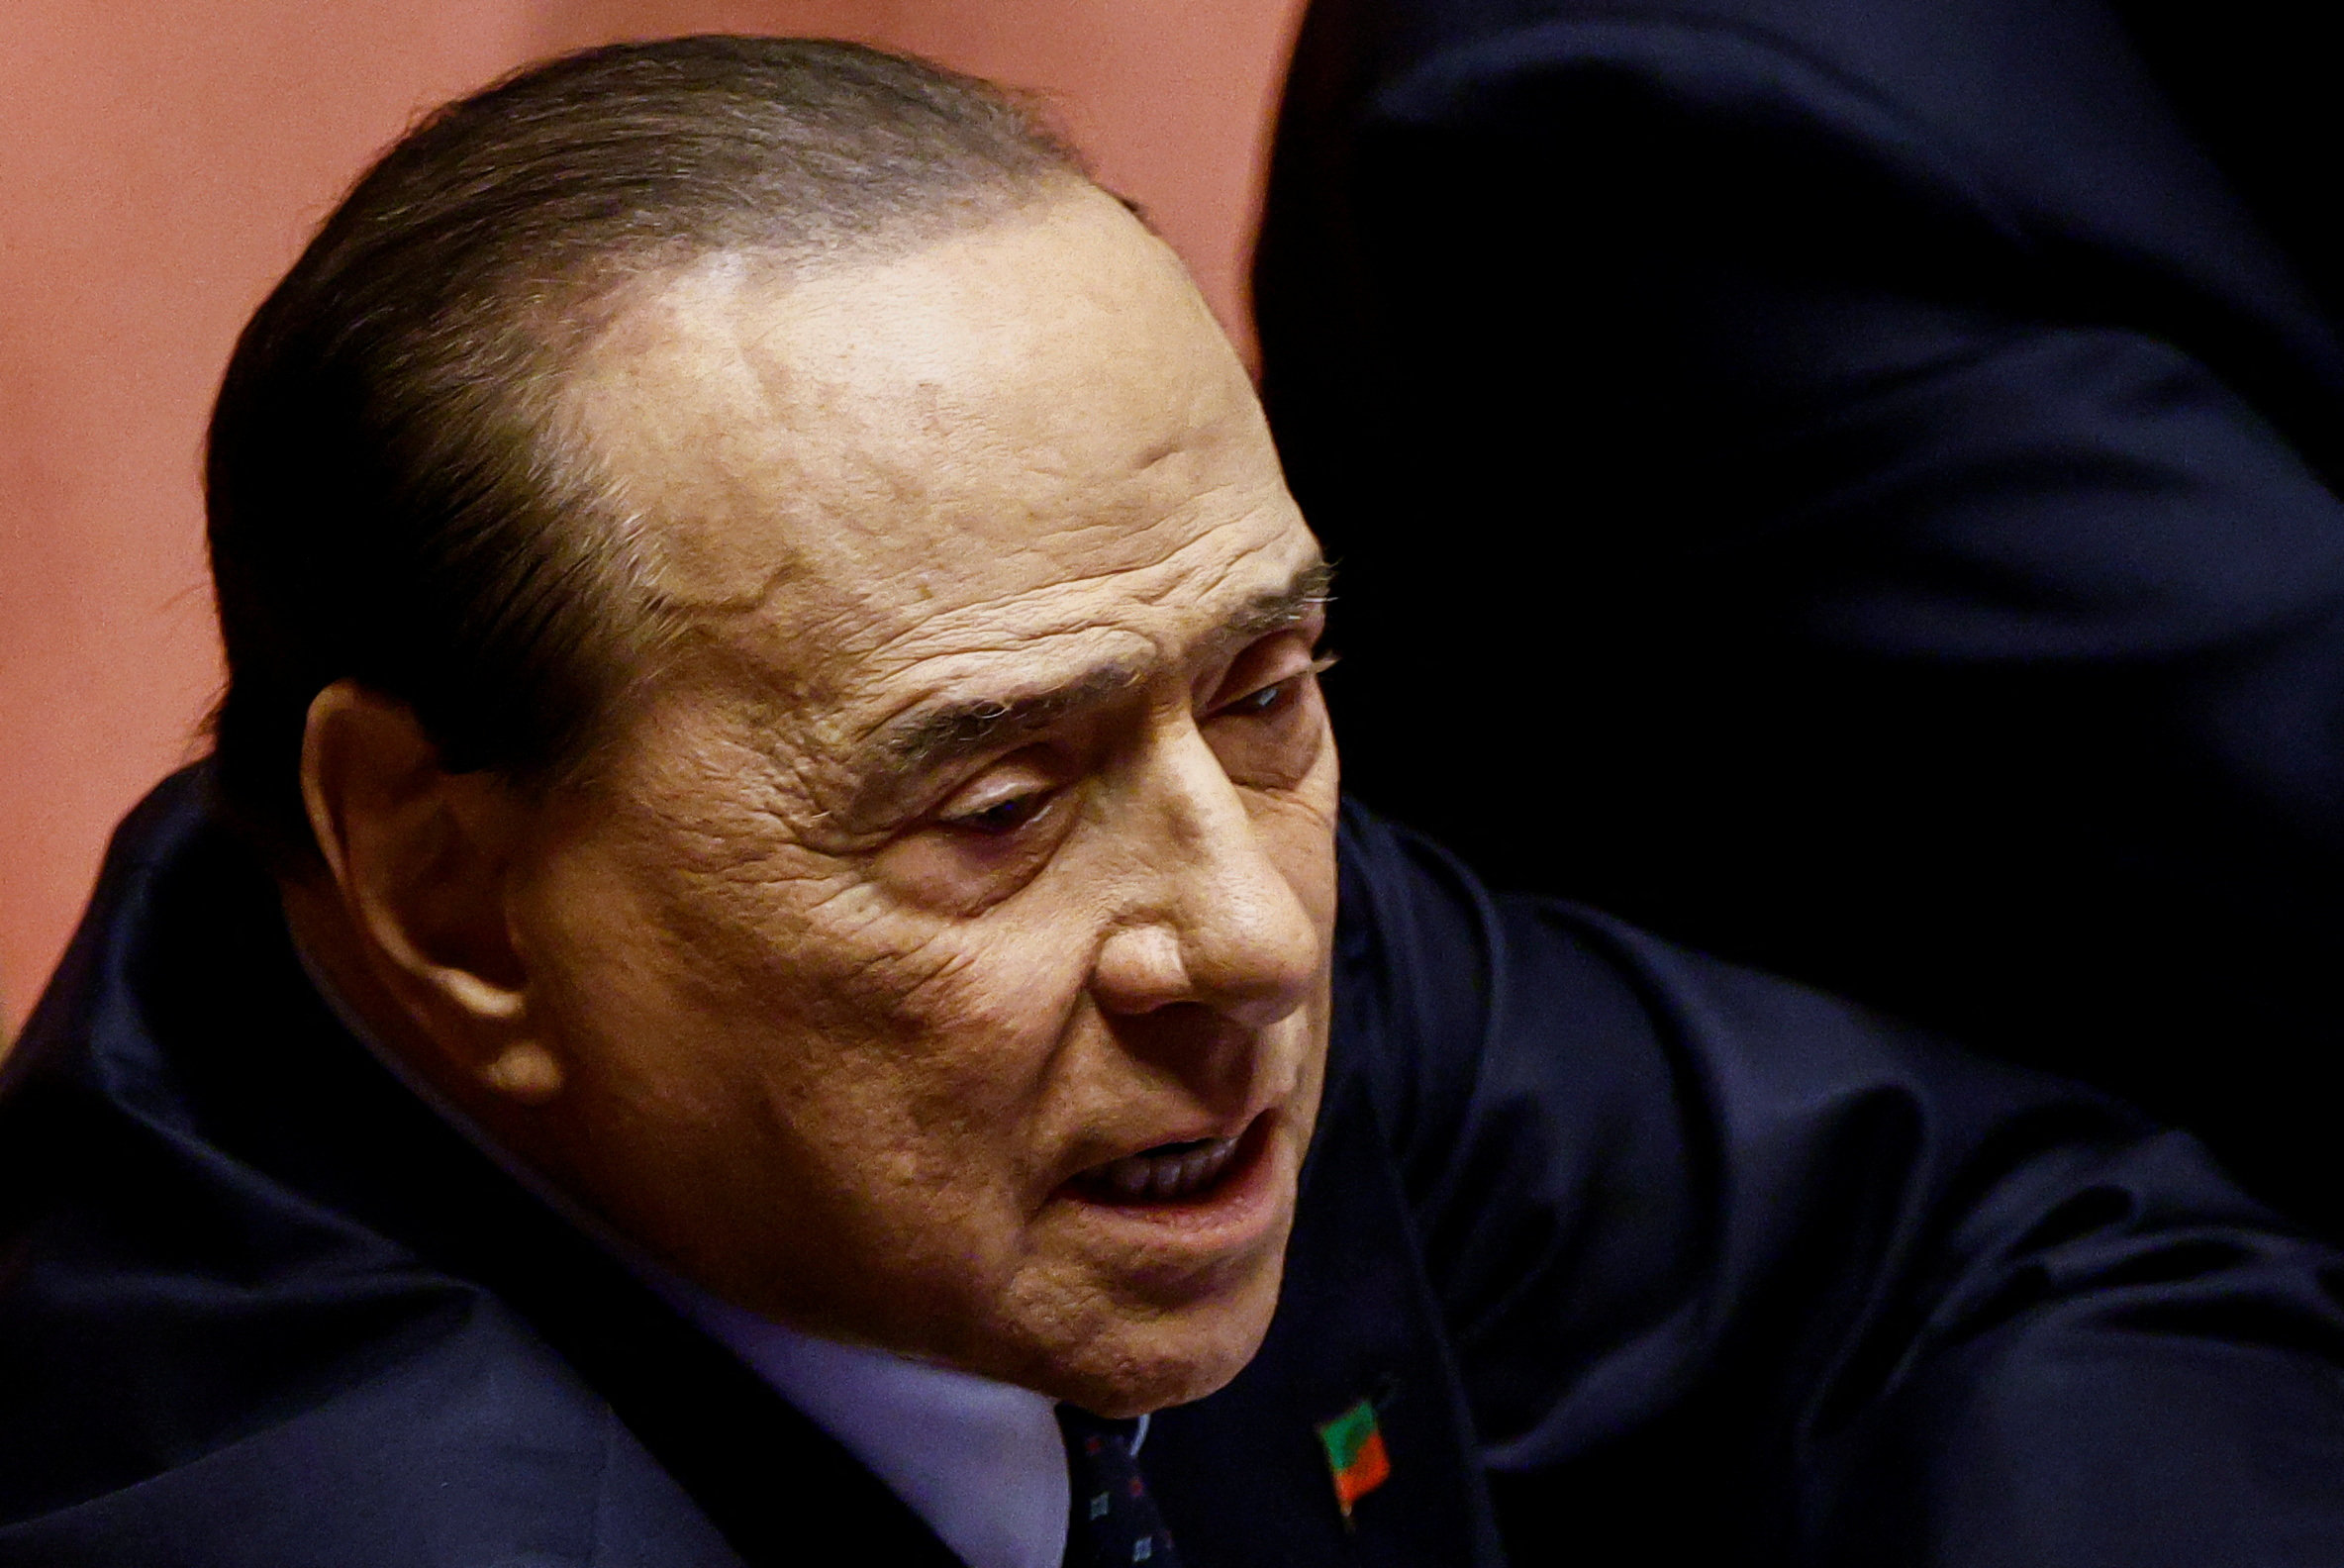 Forza Italia leader and former Prime Minister Silvio Berlusconi attends a session of the upper house of parliament in Rome